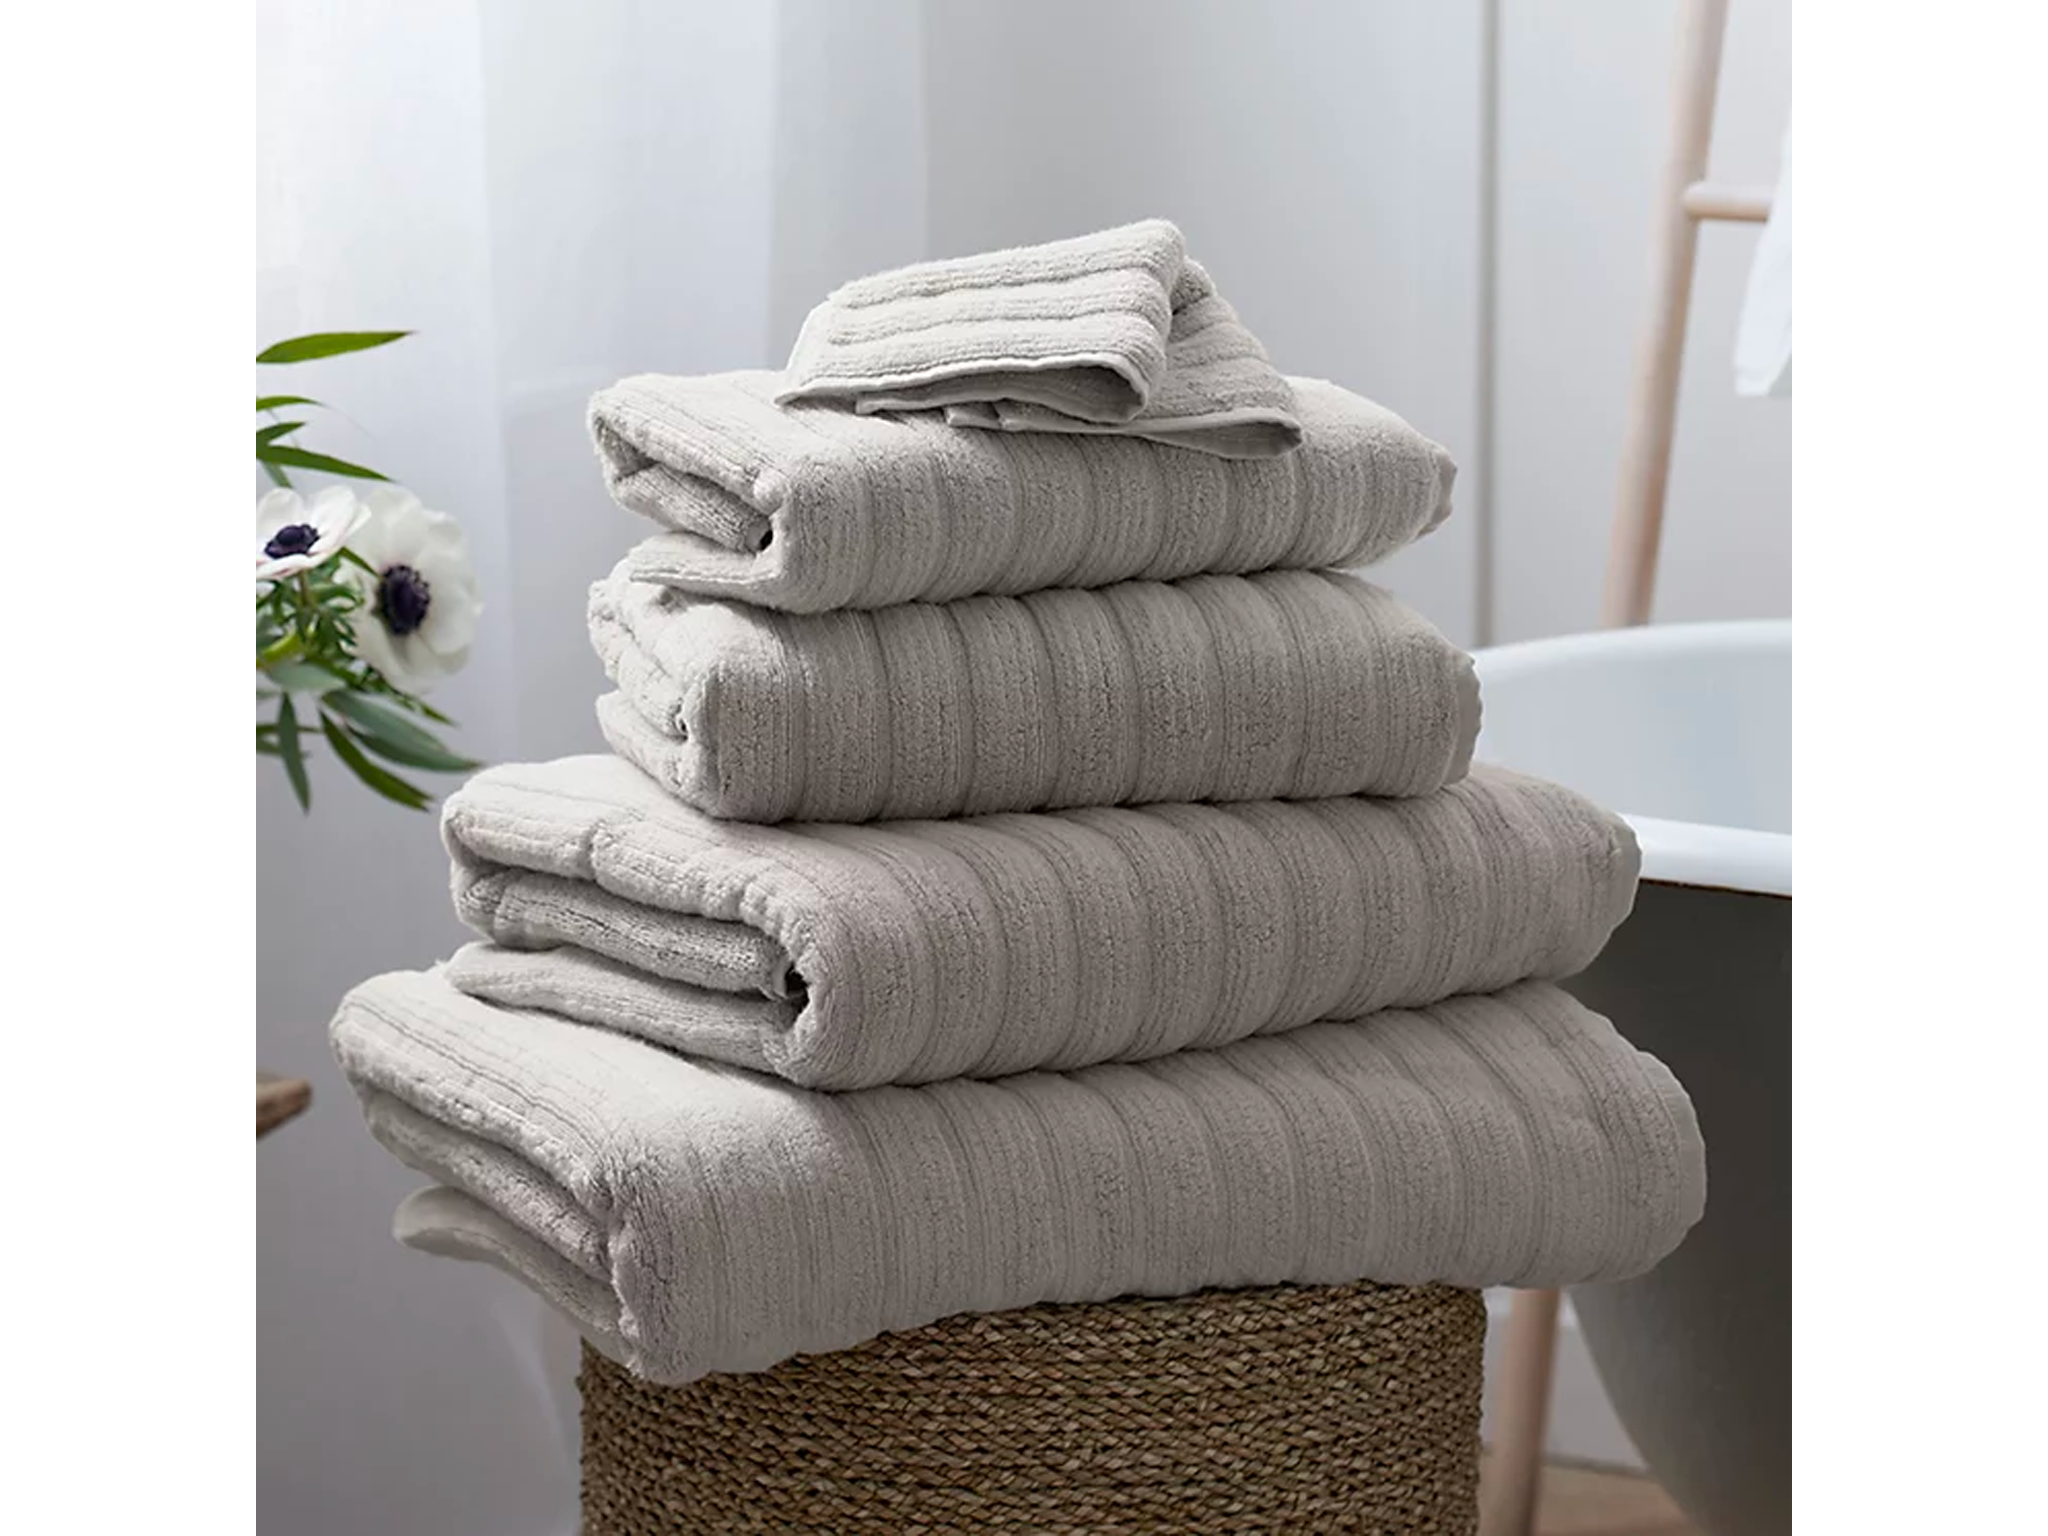 Best-bath-towels-the-white-company-indybest